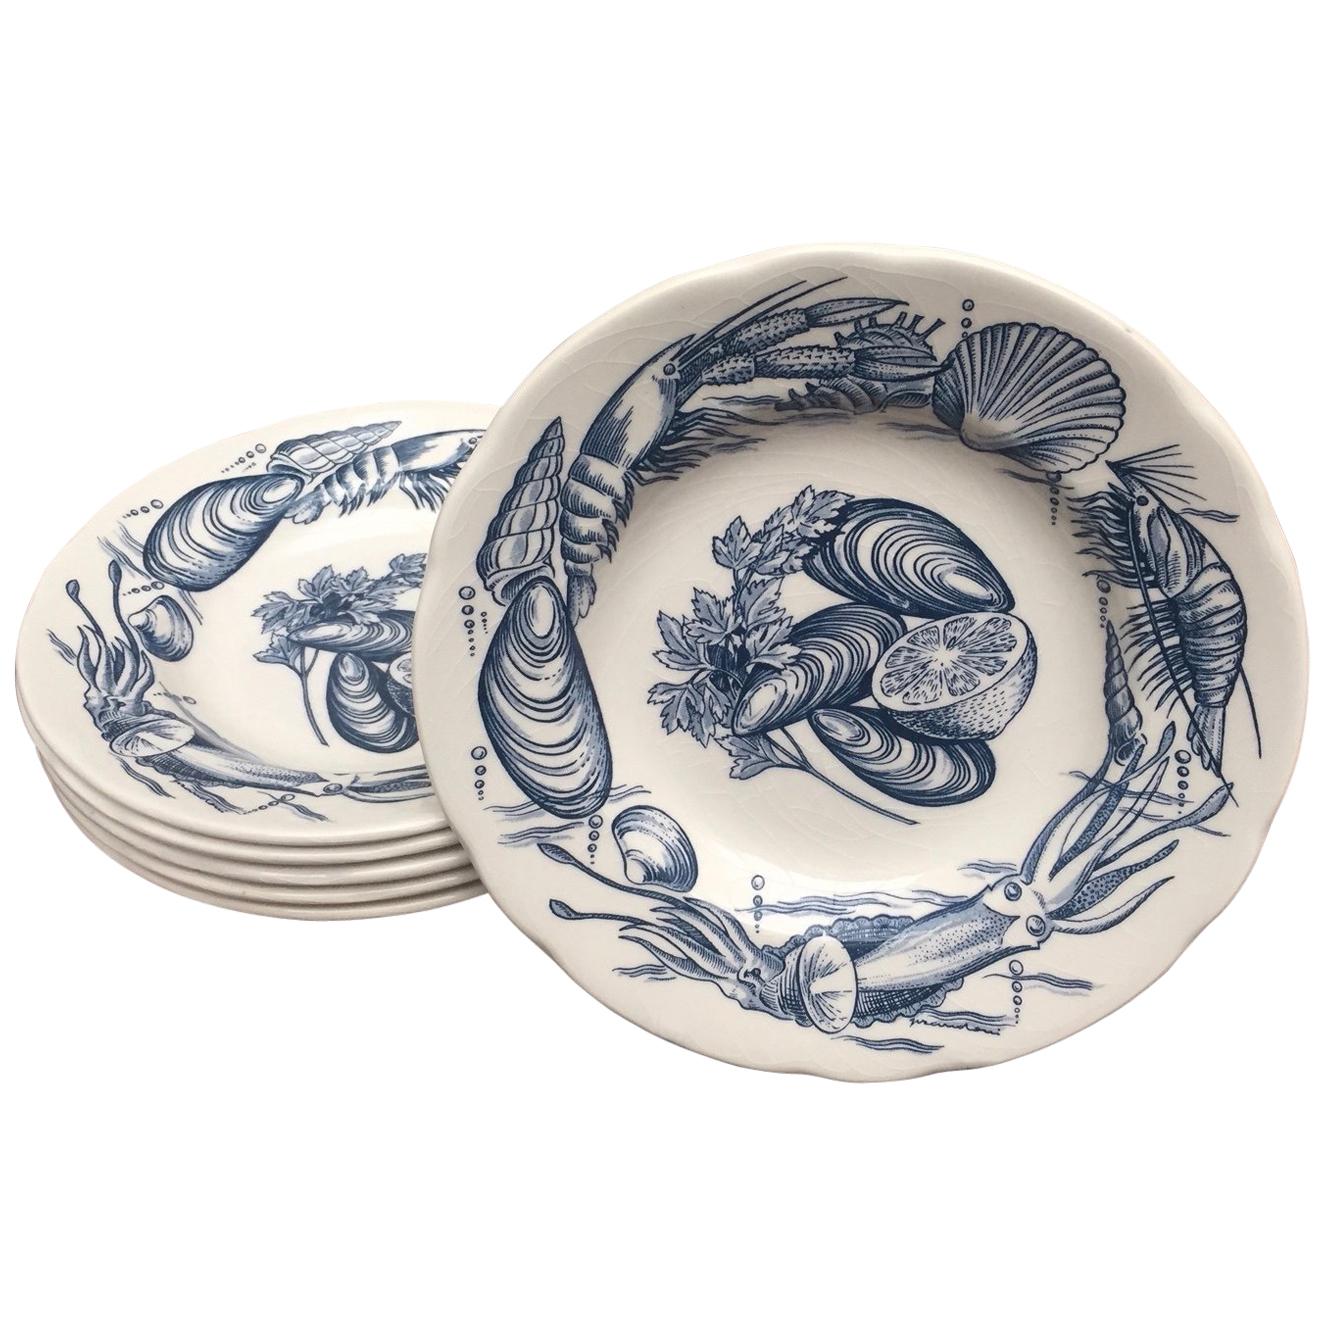 Vintage Set of Six Ironstone Soup Bowls with Shellfish Decoration in Blue